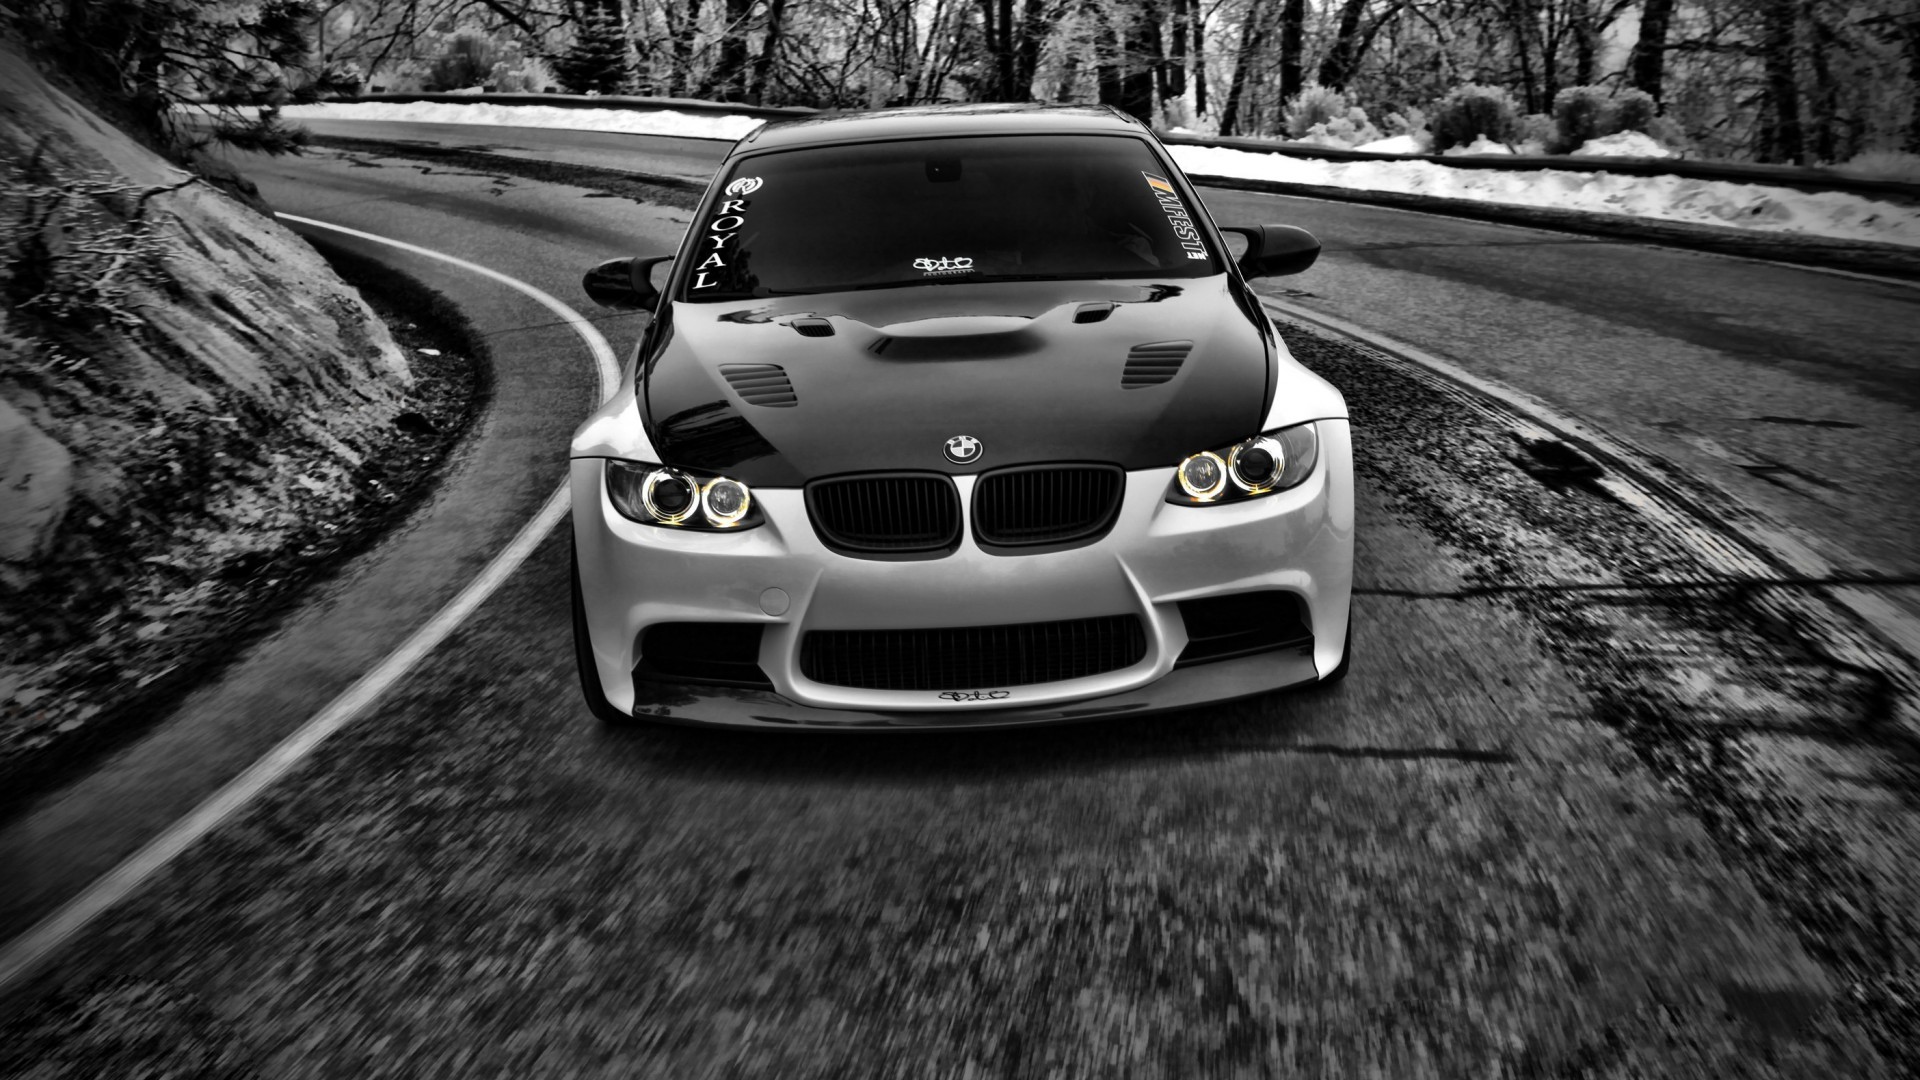 Bmw HD wallpapers 1080p